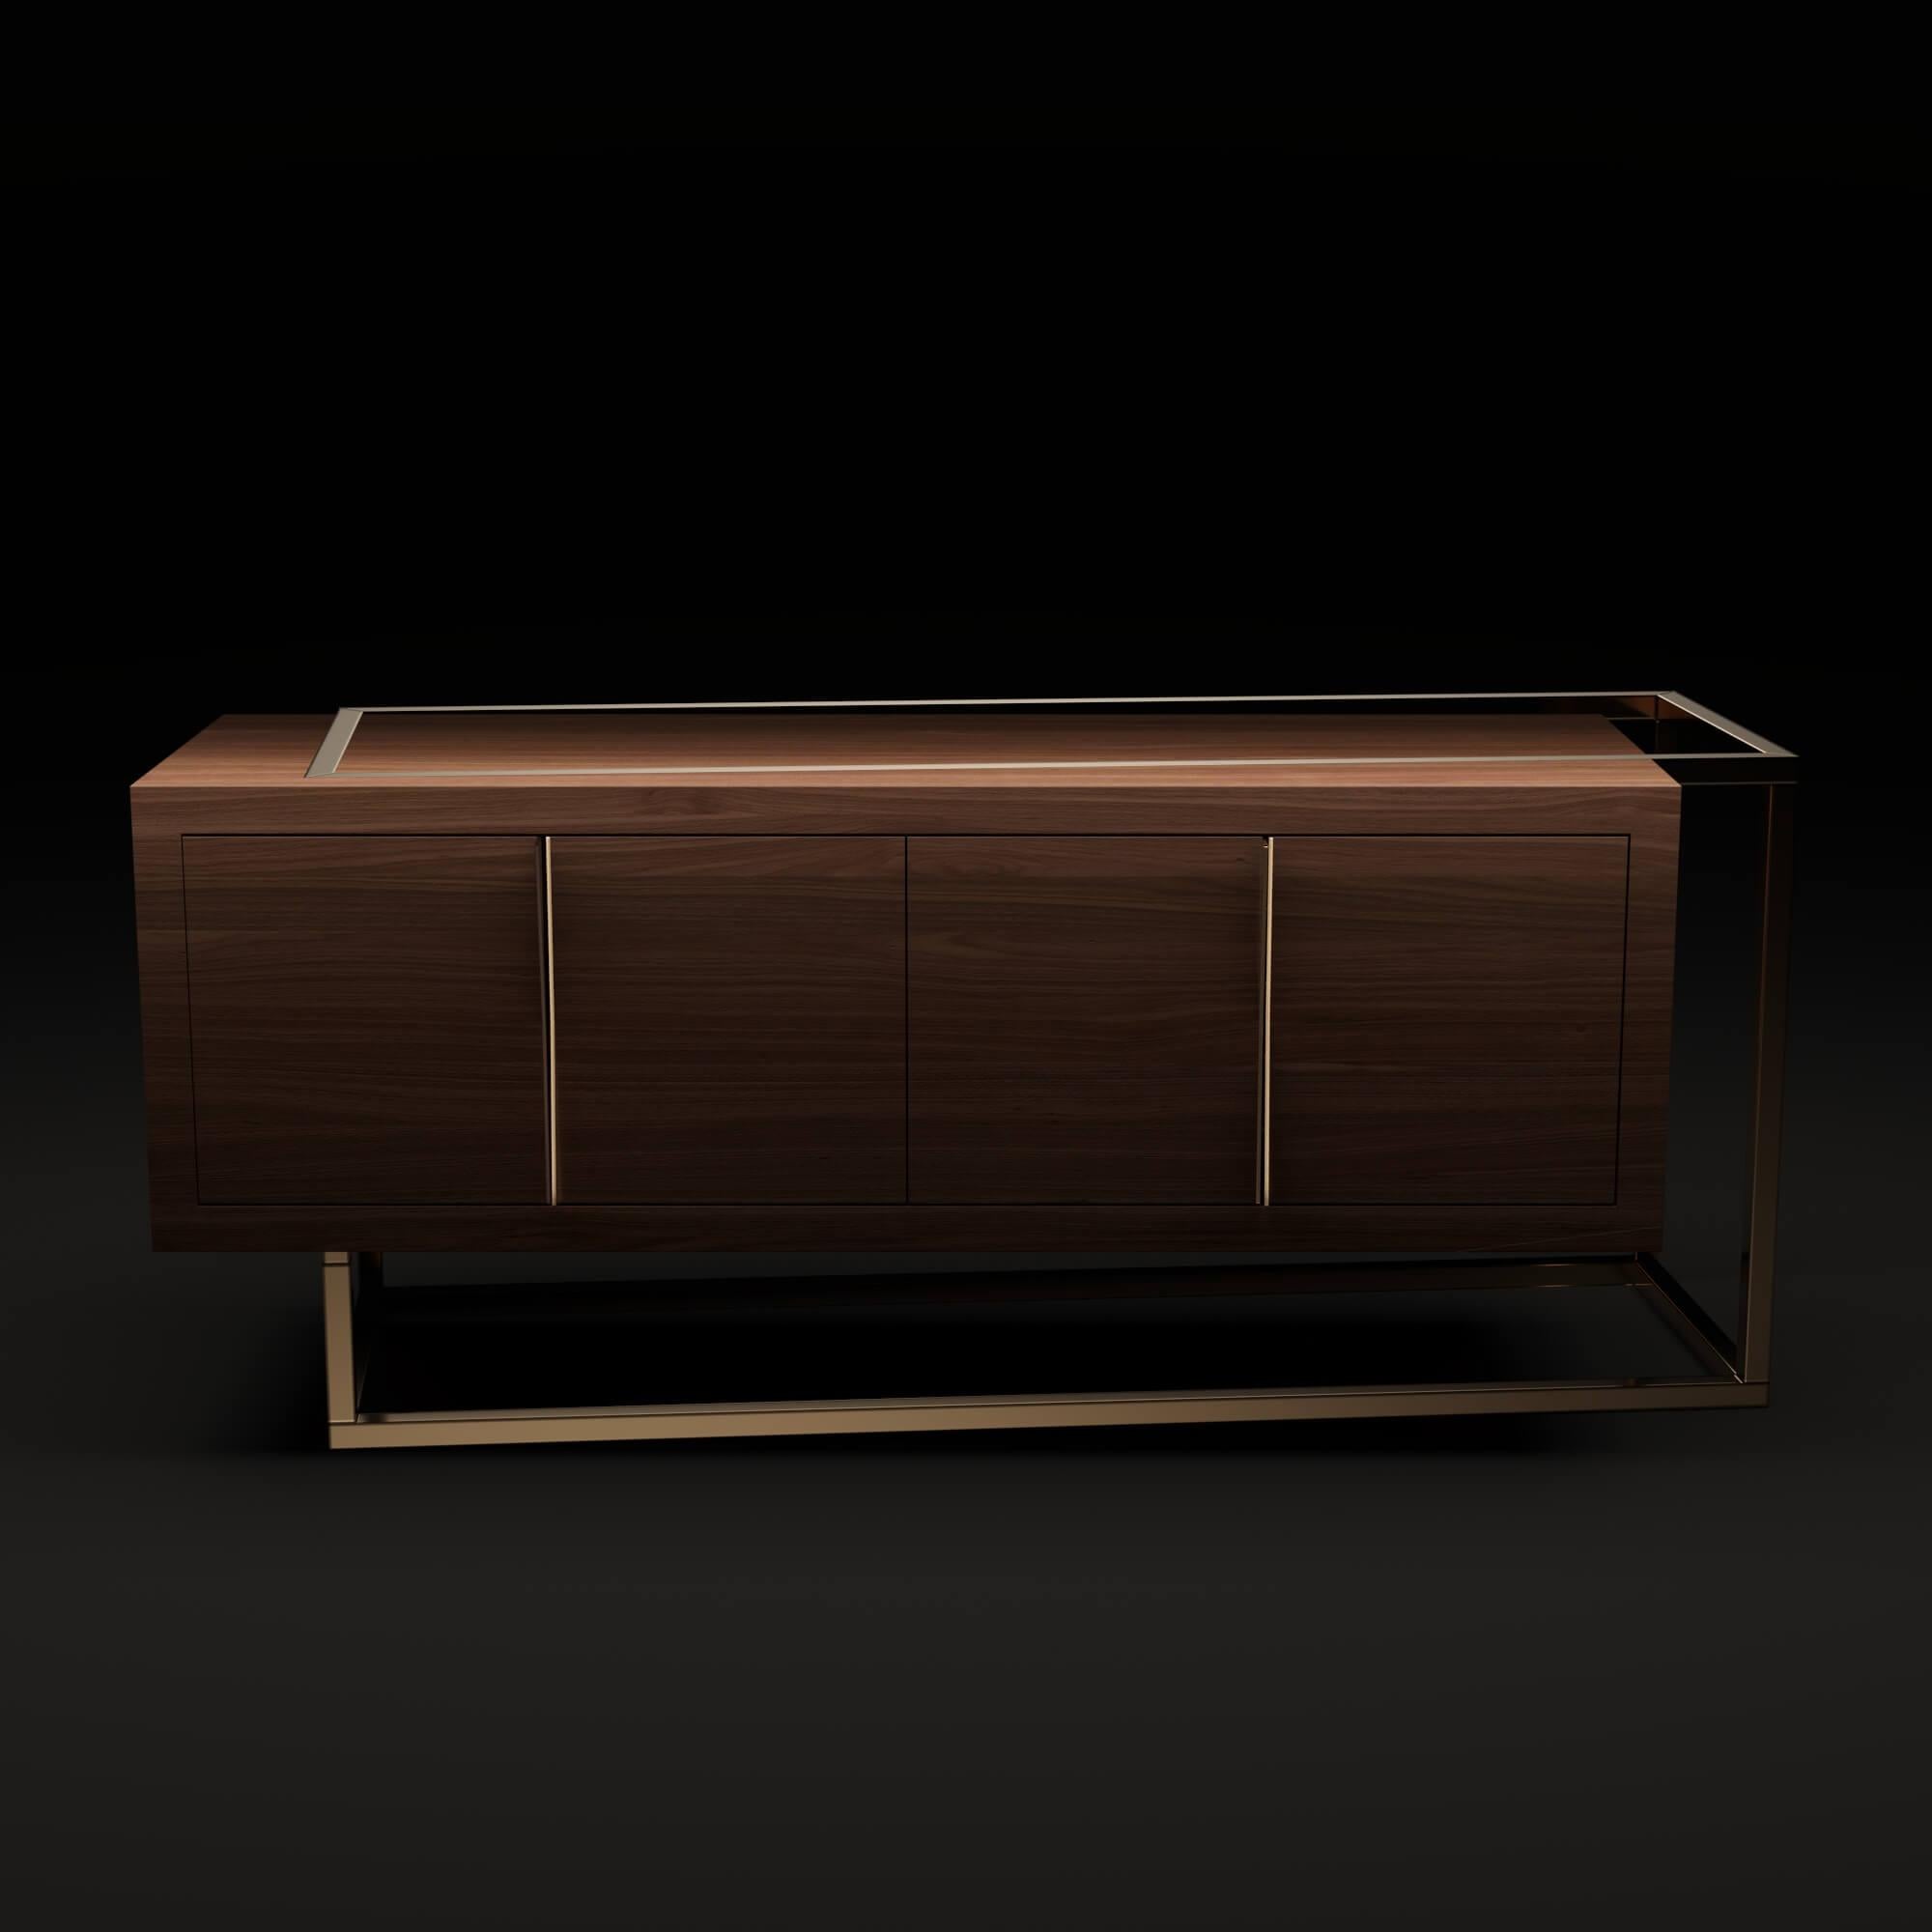 Modern Minimalist Credenza Sideboard in Ebony Macassar Wood and Brushed Brass In New Condition For Sale In Vila Nova Famalicão, PT